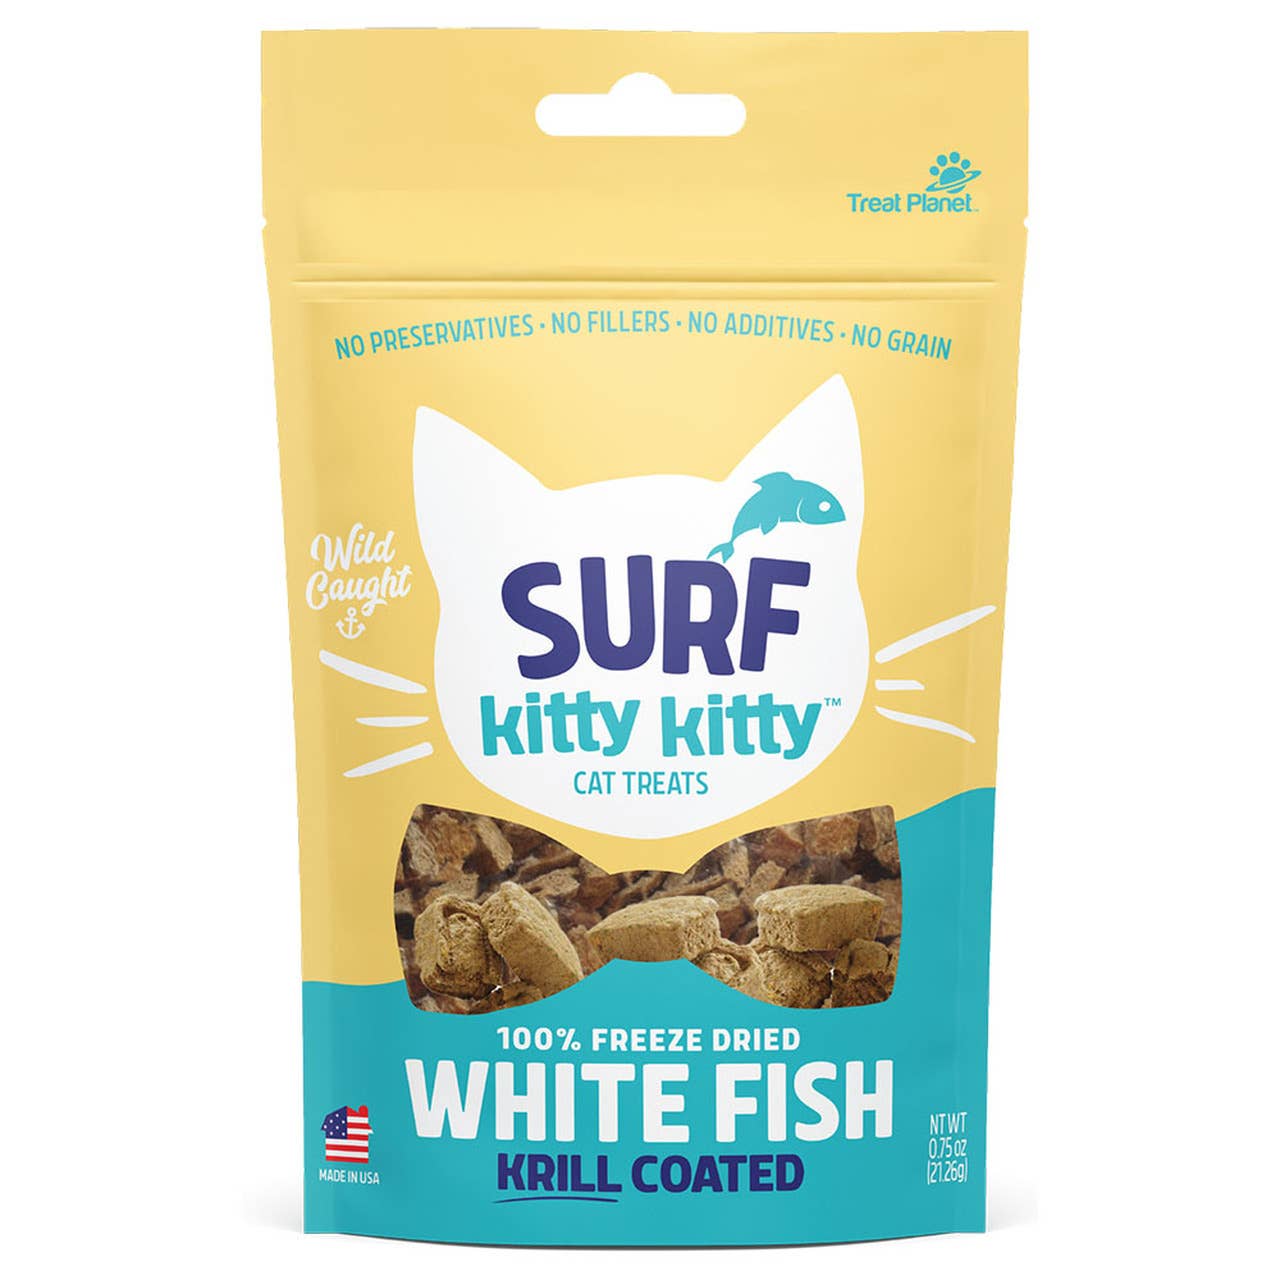 Kitty Kitty Surf Freeze Dried White Fish Treat with Krill